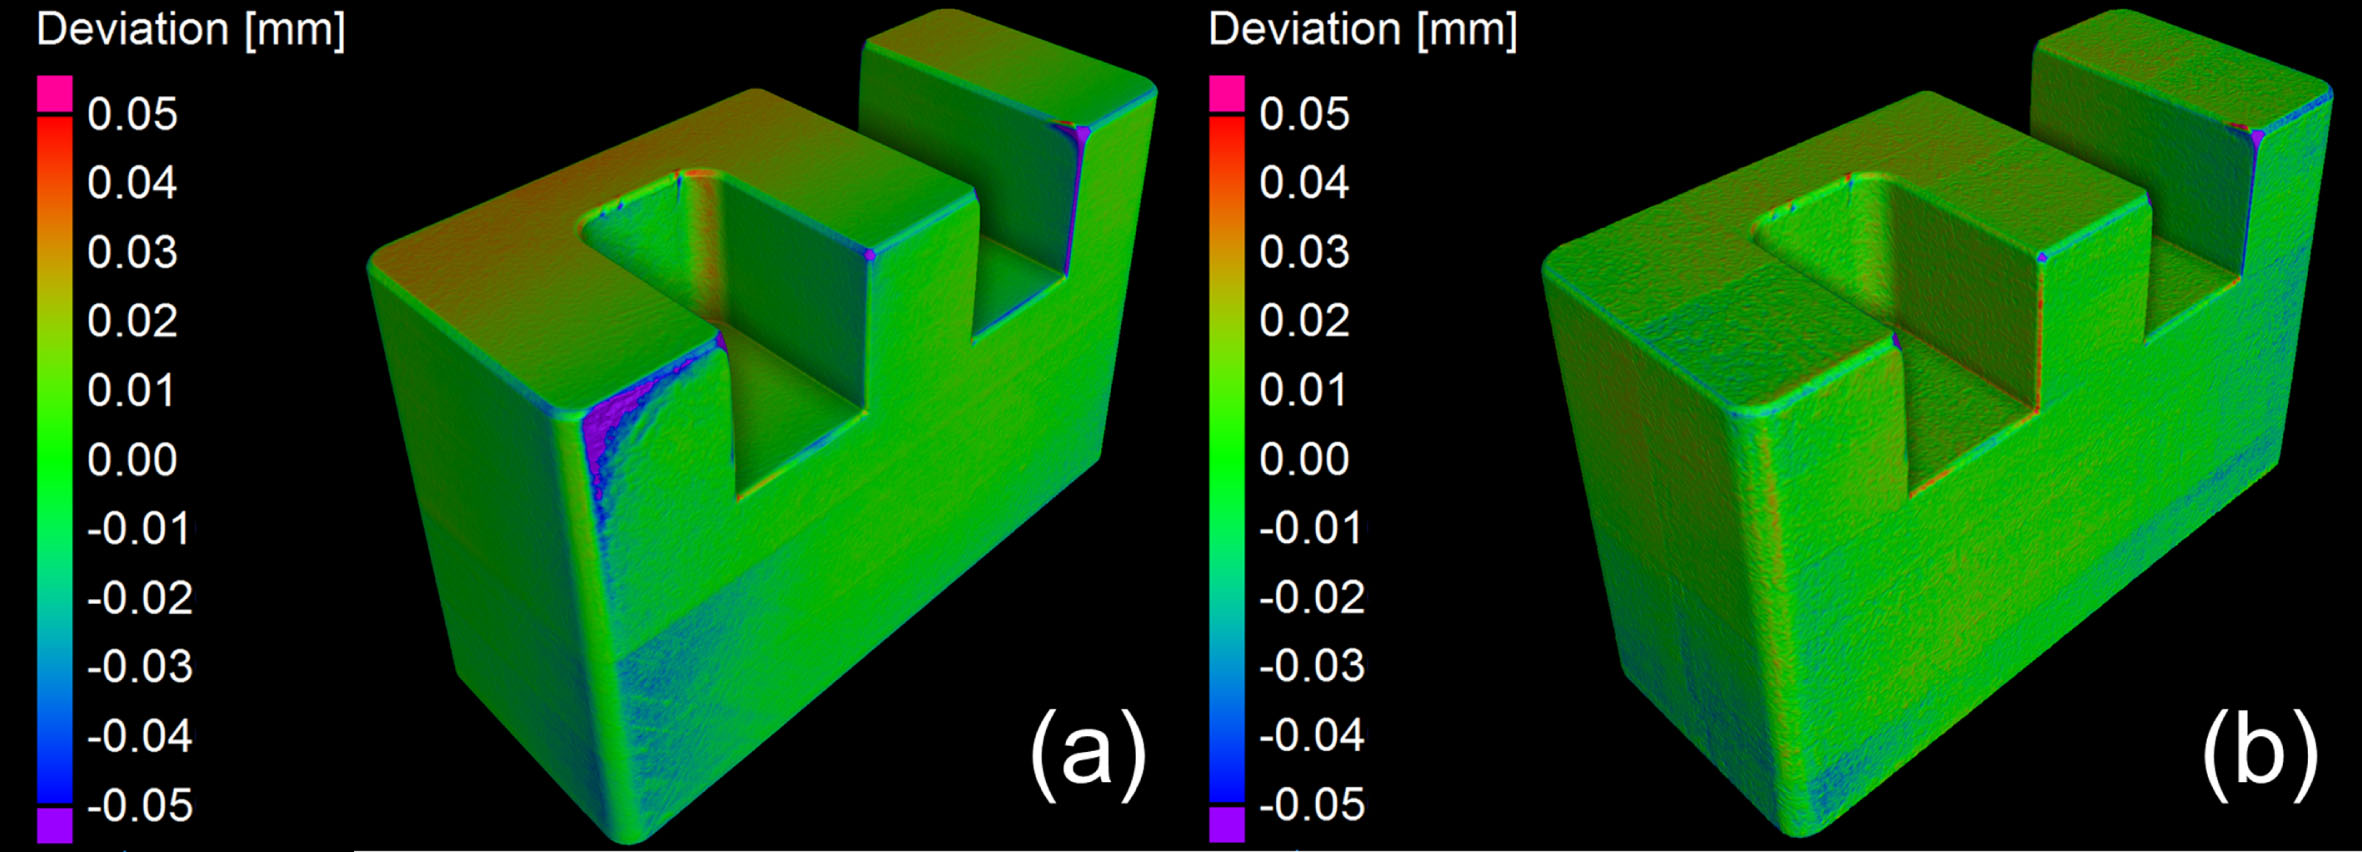 (a) Visualisation of surface deviation from CAD model for a conventional scan. (b) Visualisation of surface deviation from CAD model for an IntelliScan. Large deviations are seen for the corners of the conventional scan compared to IntelliScan. It is assumed that the test sample is free of manufacturing defects and the CAD model is representative of the test sample.